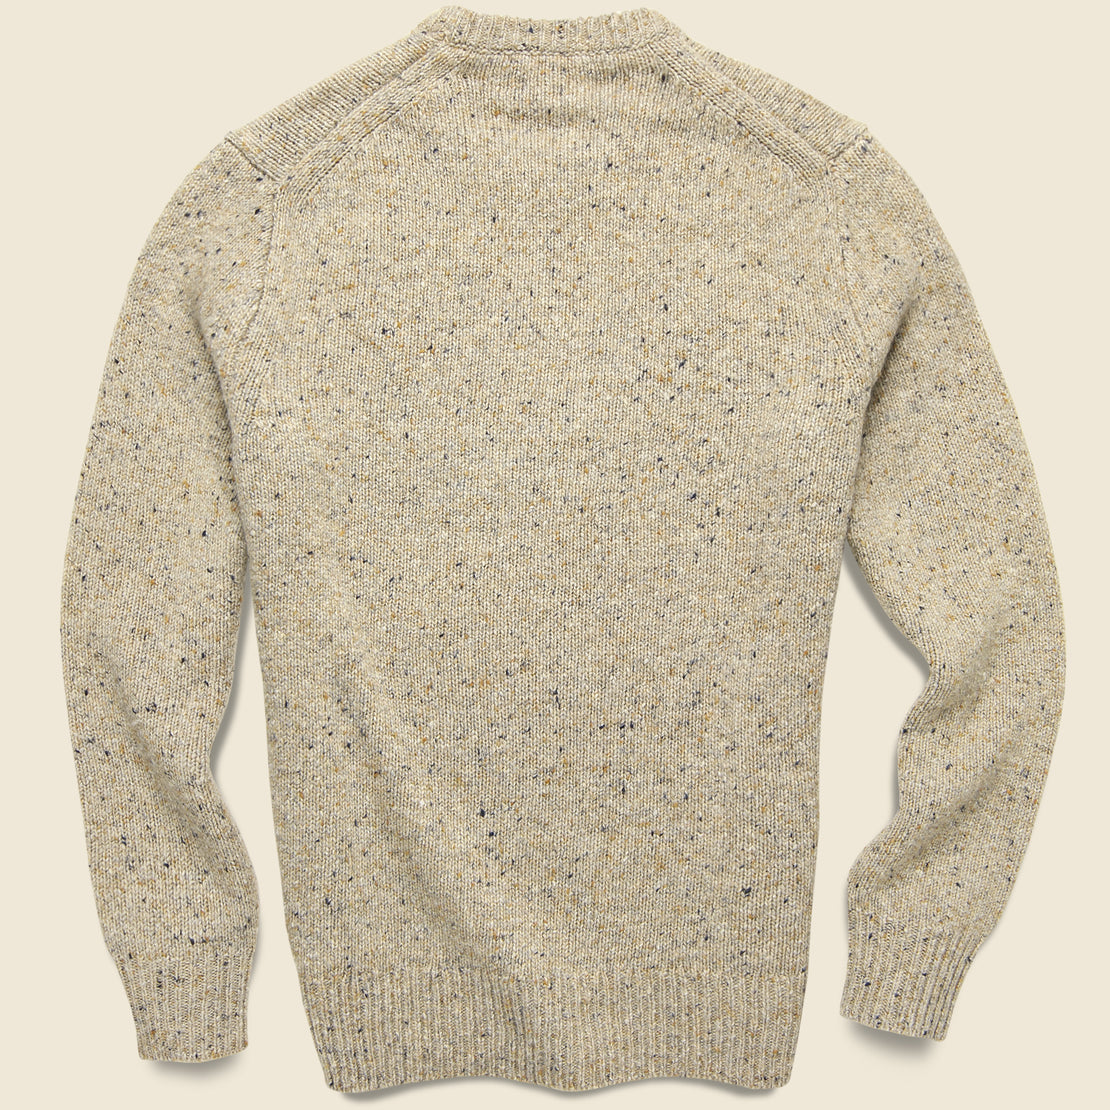 Donegal Wool Sweater - Oatmeal - Alex Mill - STAG Provisions - Tops - Sweater